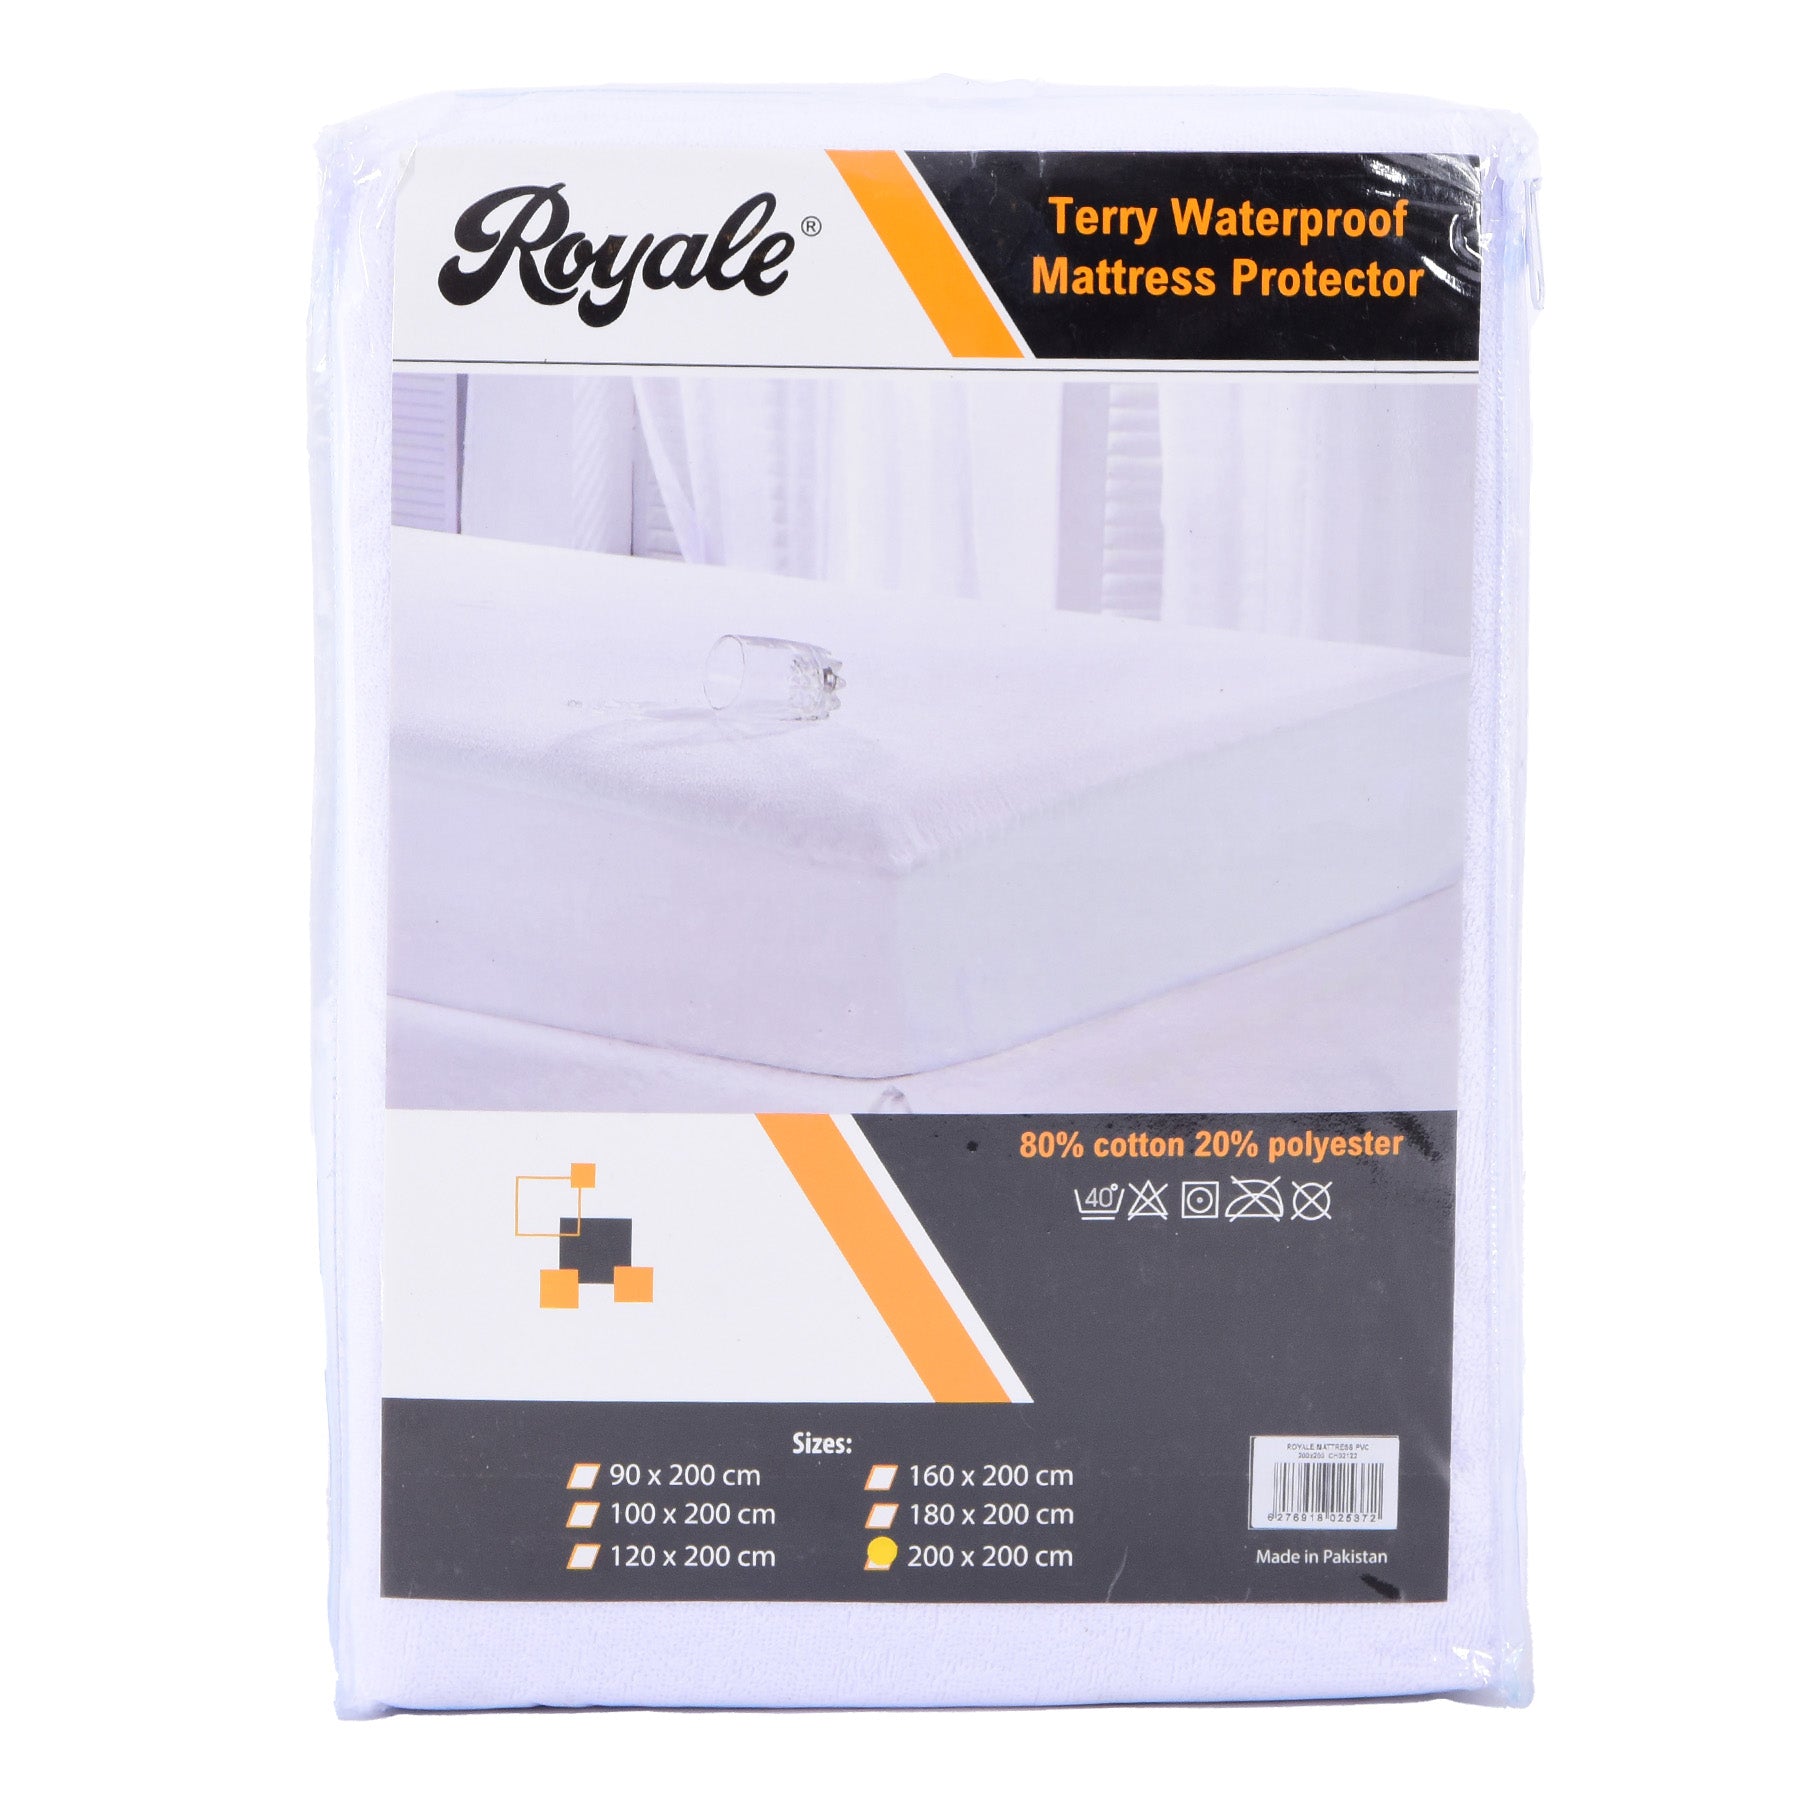 King Mattress Protector, White Color size: 200x200cm.